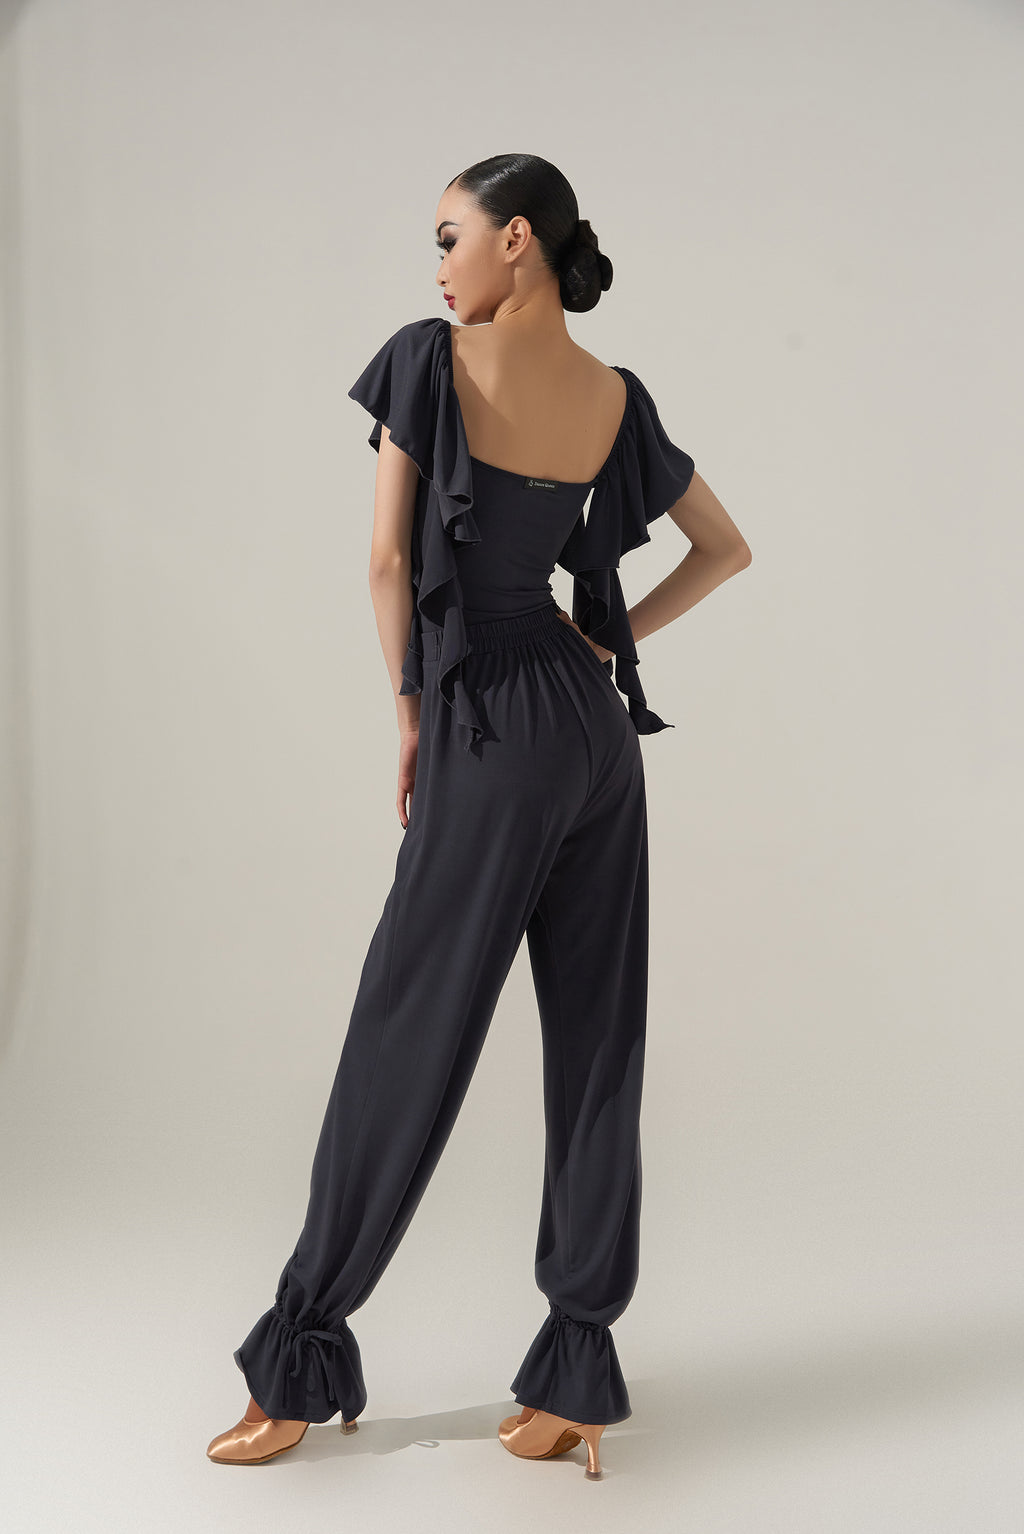 DQ-266 DANCE QUEEN Ankle Strap Trousers